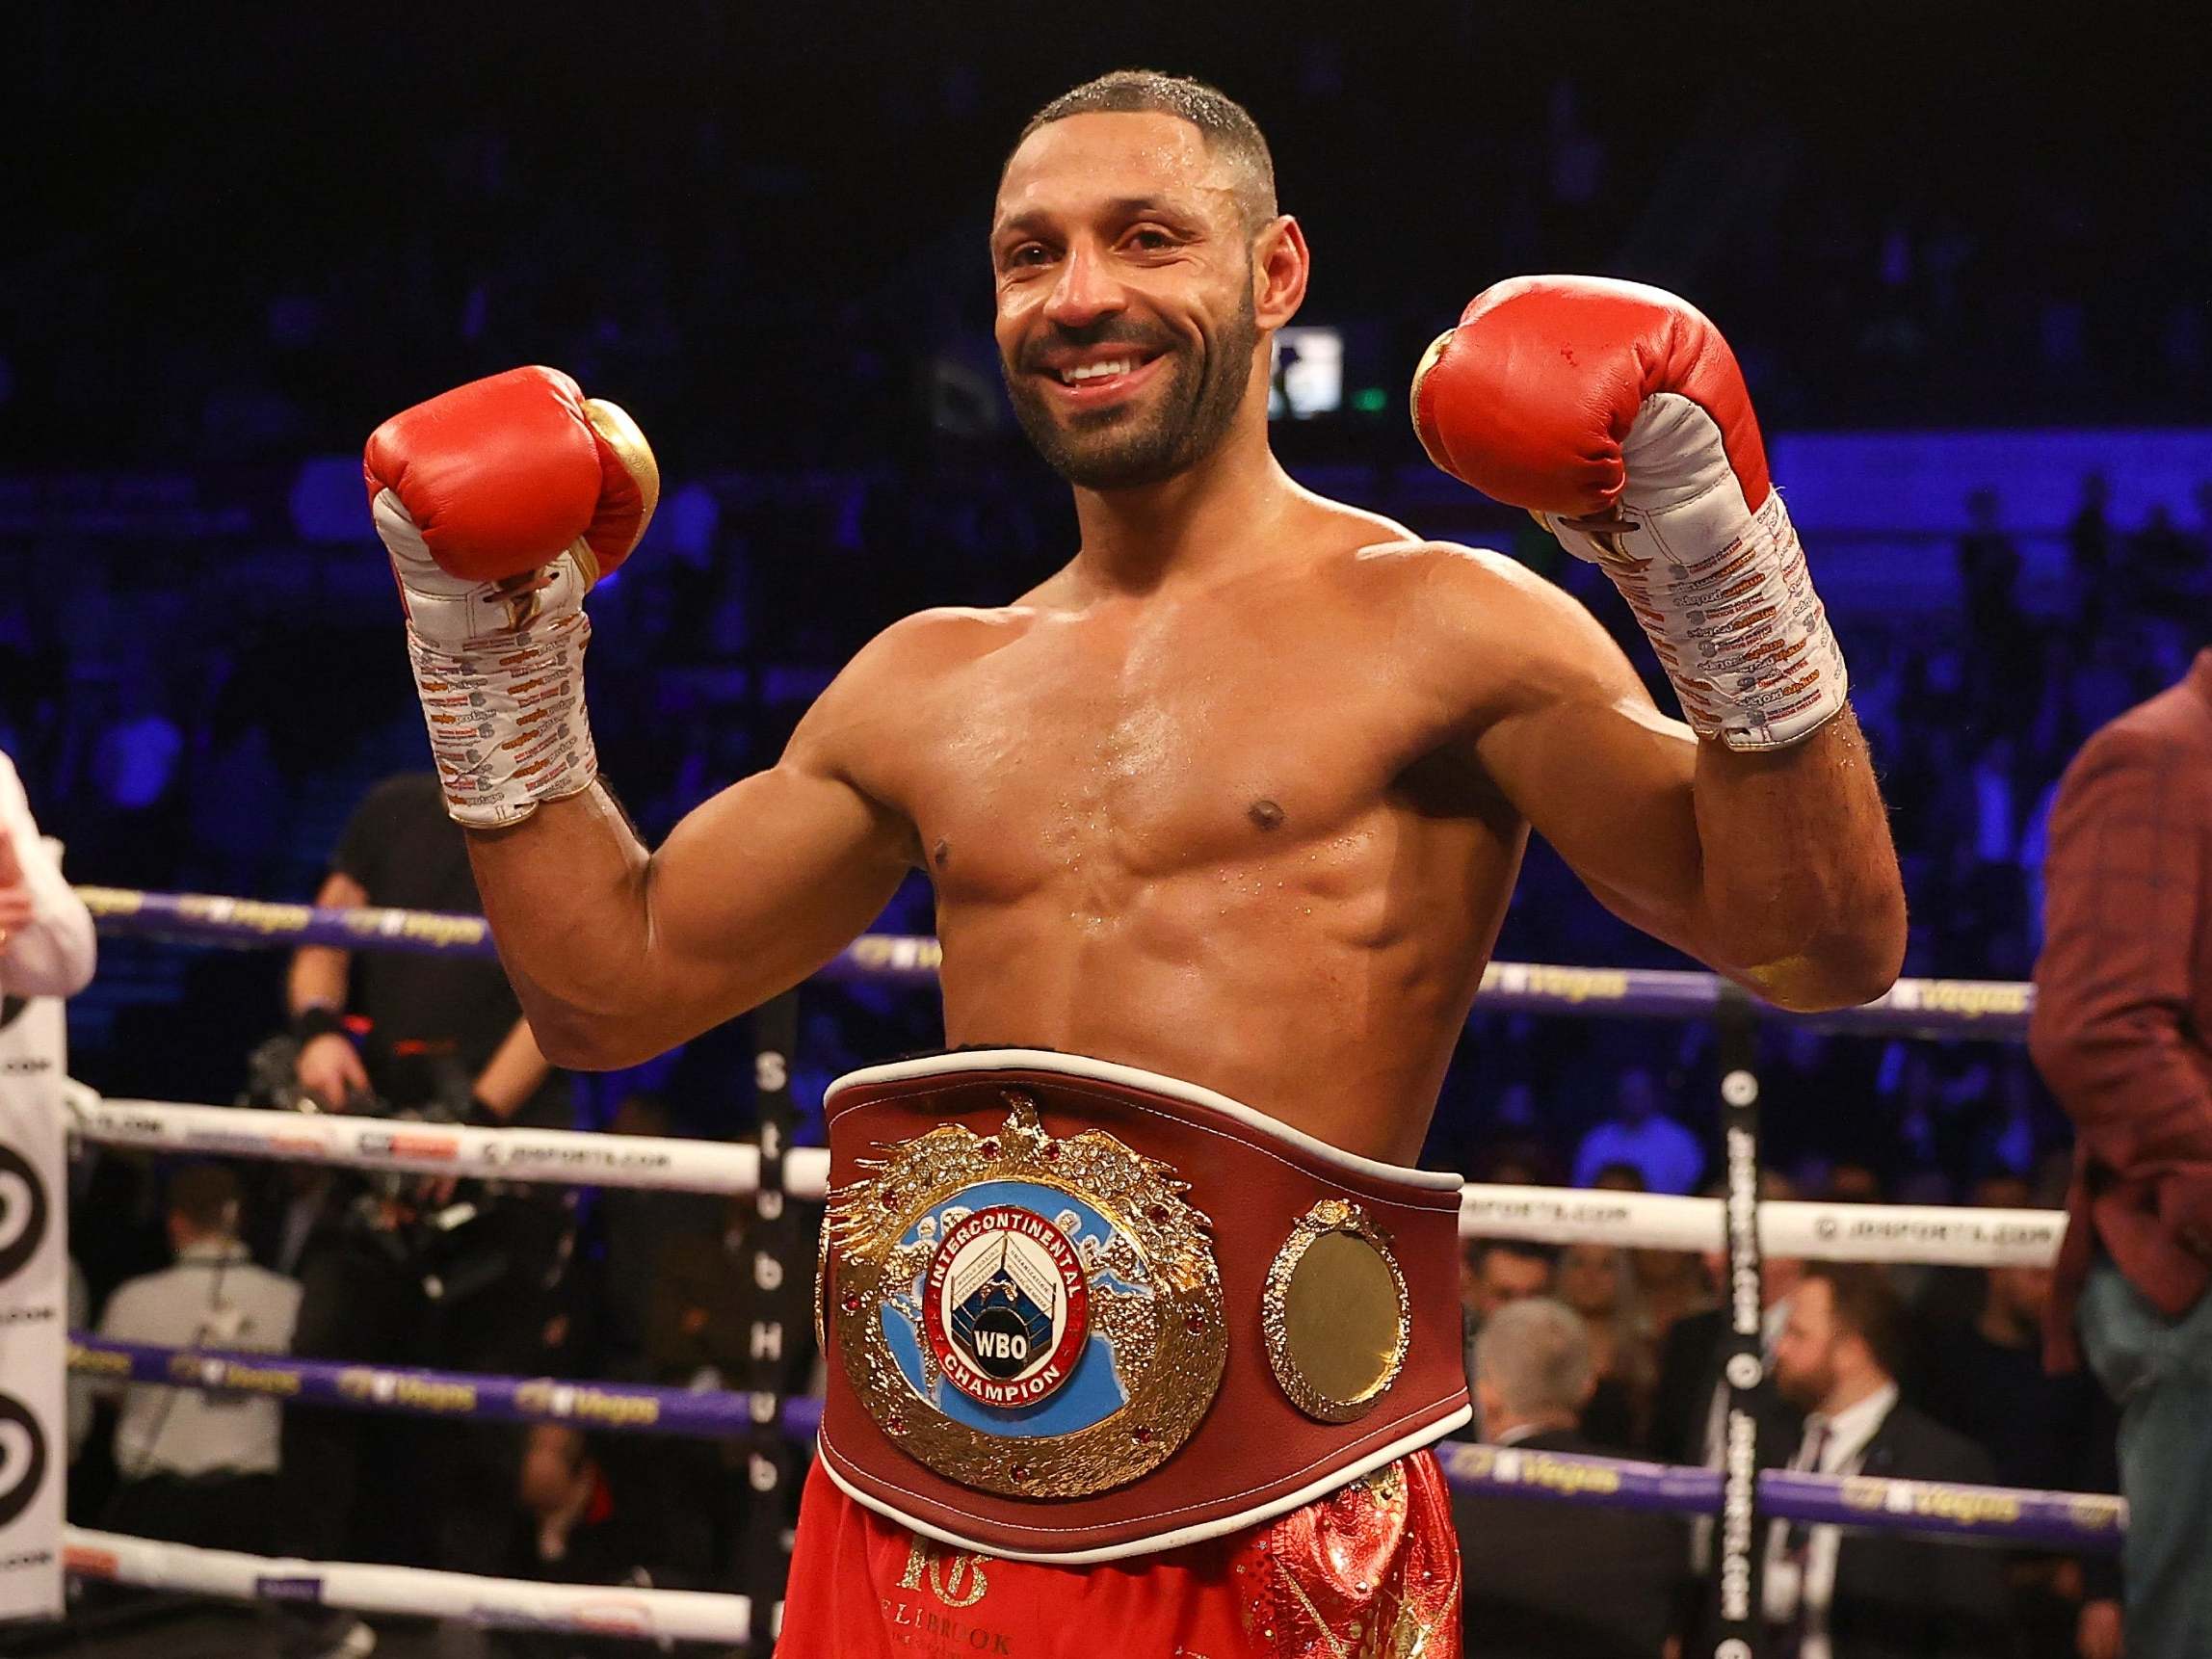 Brook returned to the ring for the first time since December 2018